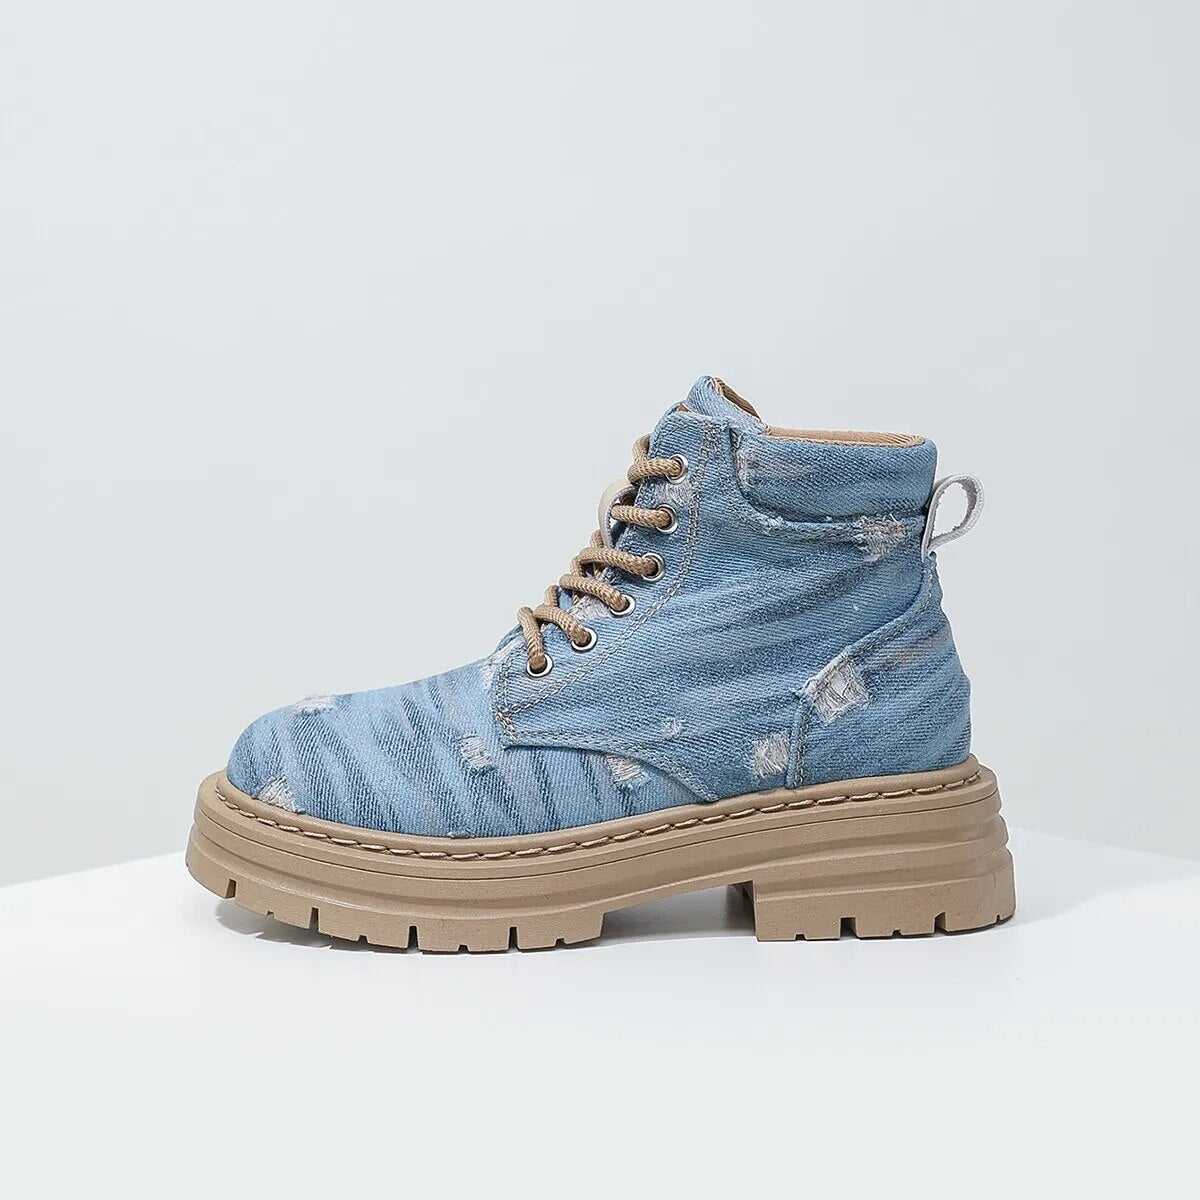 Women's Denim Fashion High-Top Lace-up Martin Boots GOMINGLO